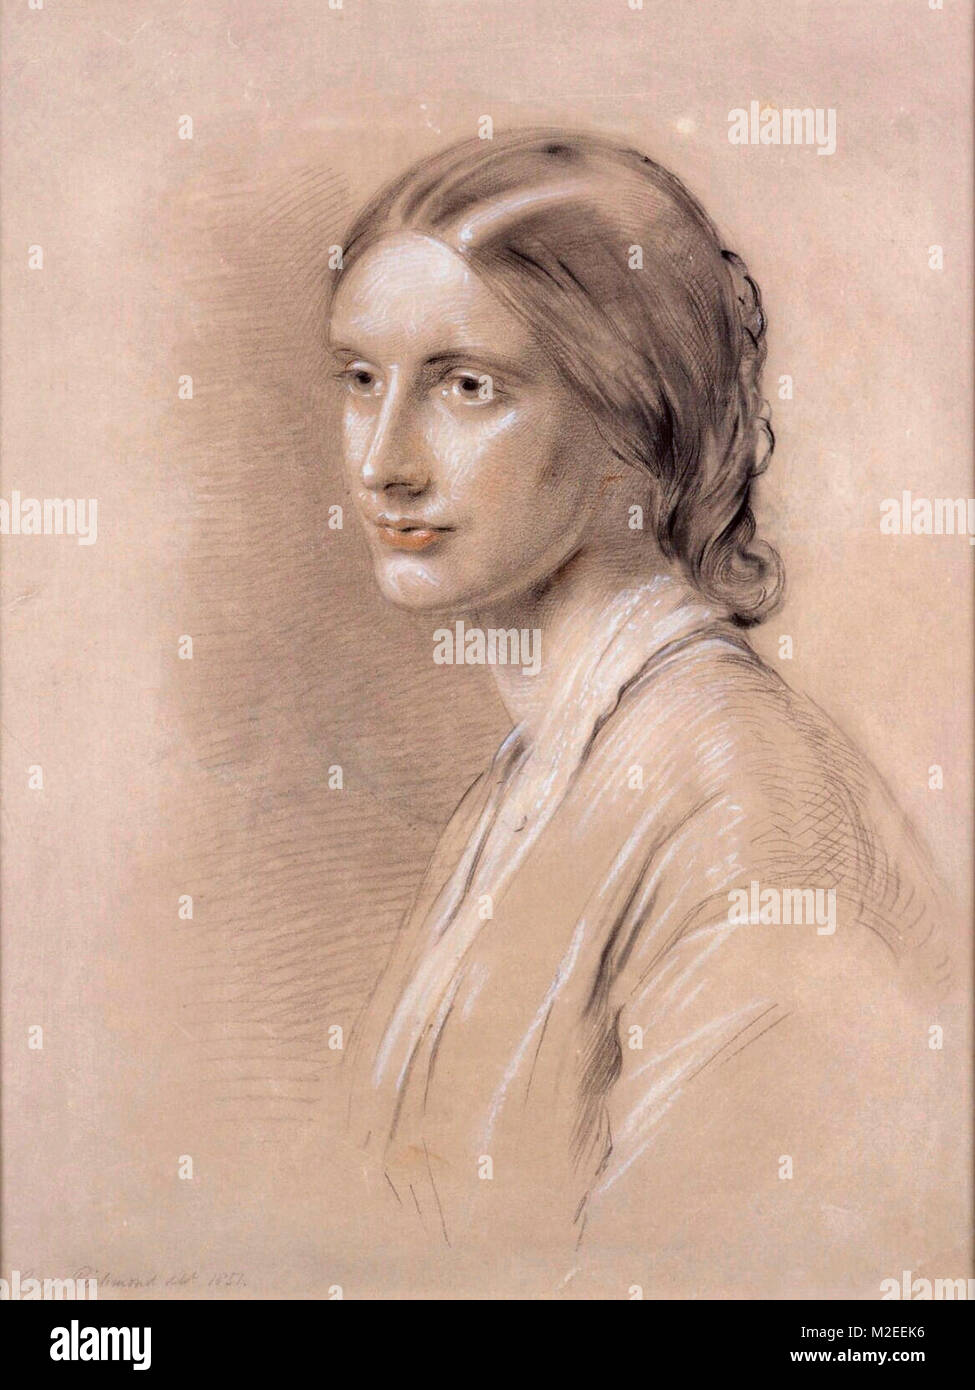 Josephine Butler in 1851, portrait by George Richmond. Josephine Elizabeth Butler, nee Grey; 13 April 1828 - 30 December 1906 was an English feminist and social reformer in the Victorian era. Stock Photo